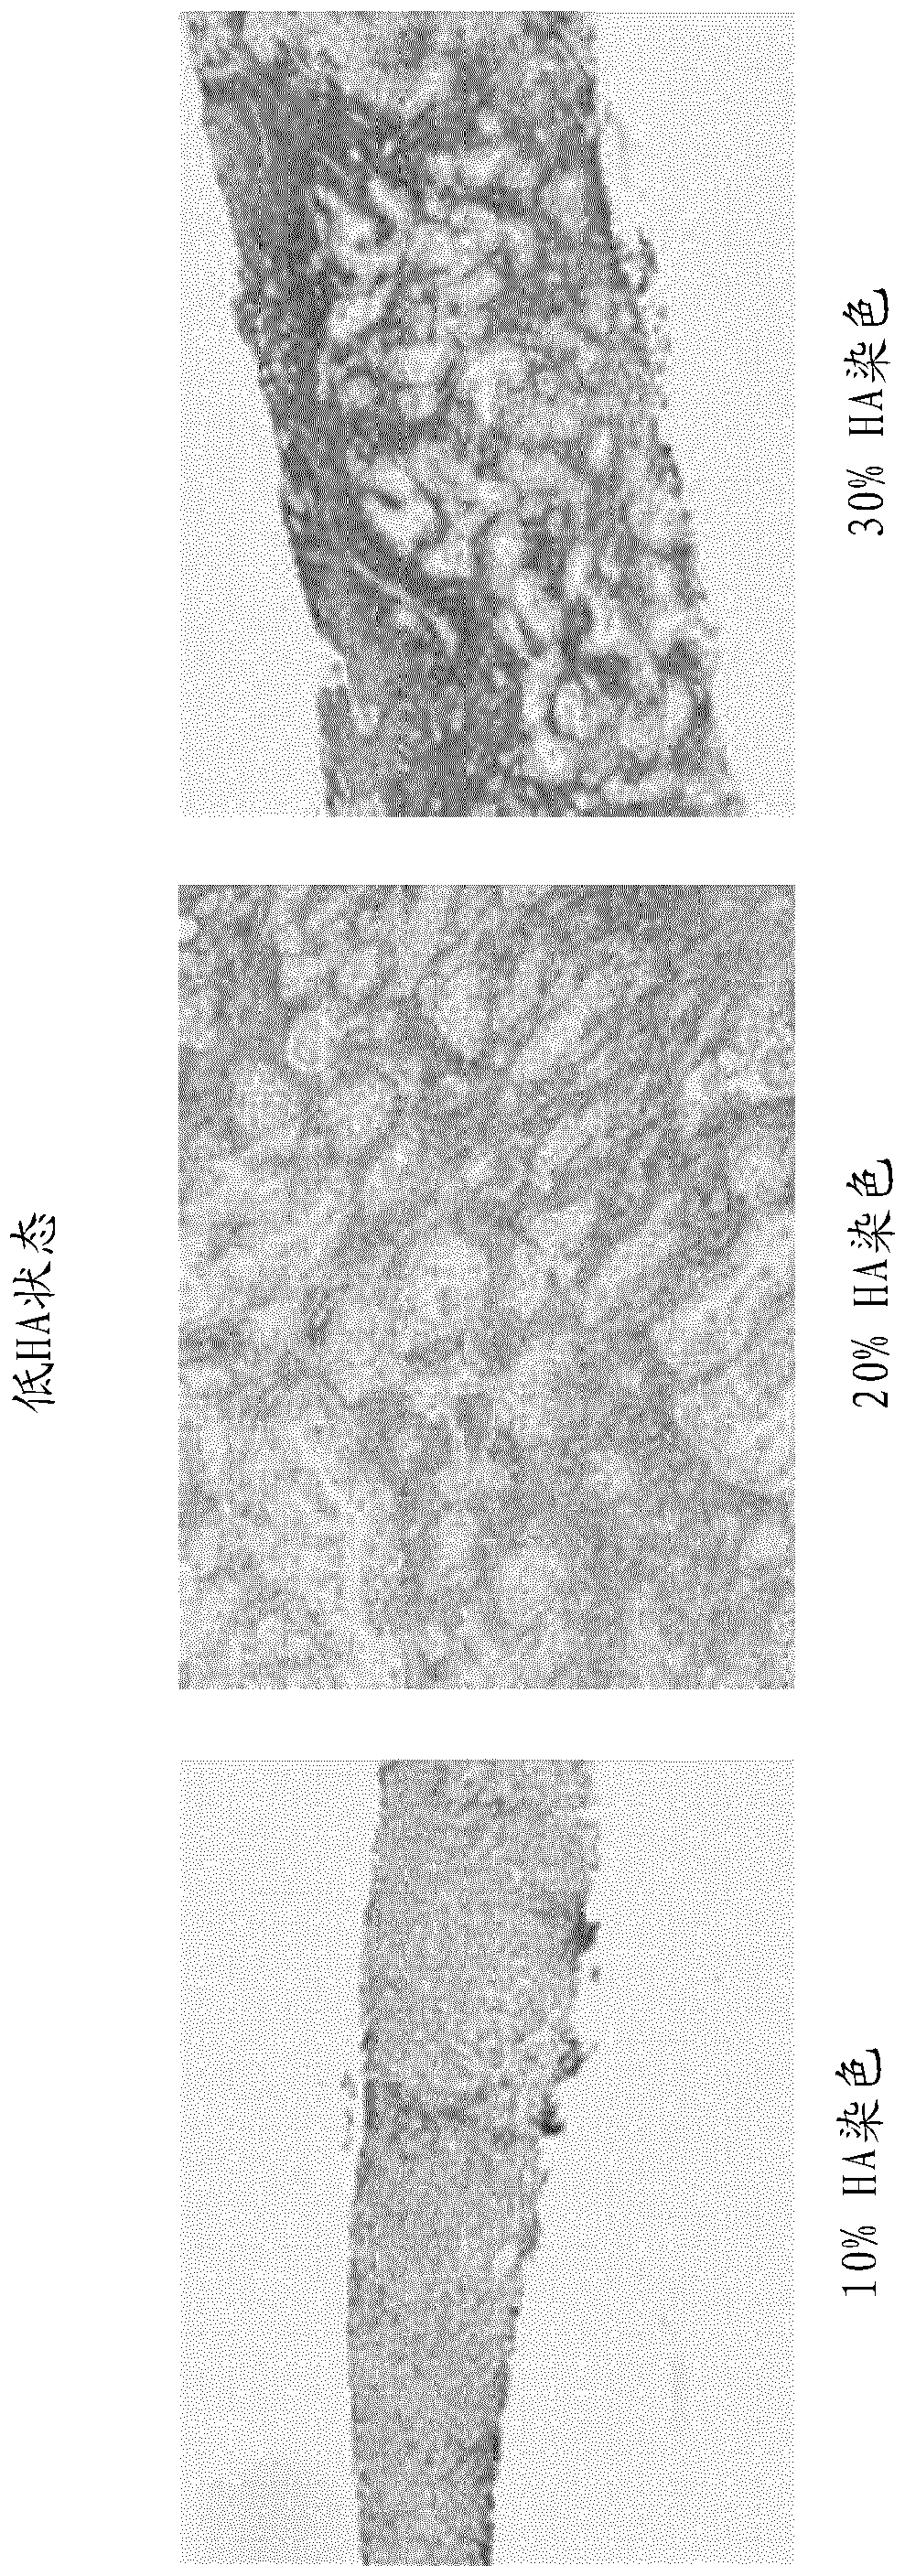 Methods and systems for scoring extracellular matrix biomarkers in tumor samples